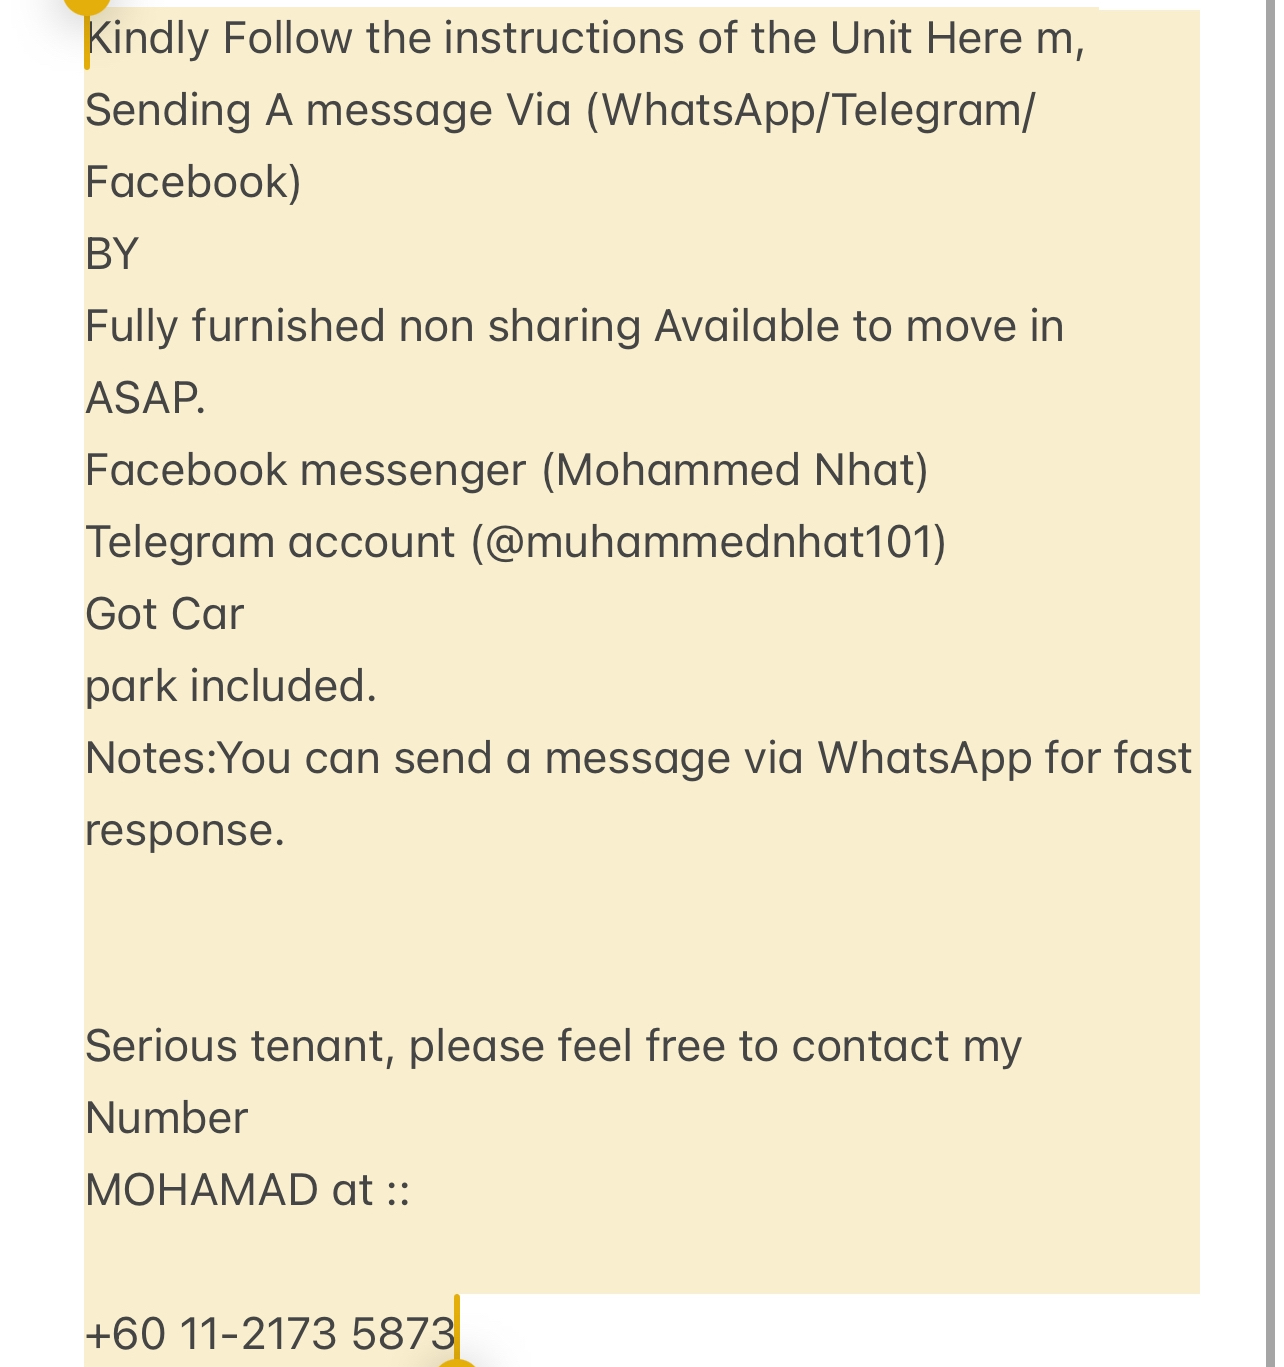 room for rent, master room, jalan taman ricketts, Send the owner a message on WhatsApp/facebook if you want to RENT the unit facebook (Mohammed Nhat)&Telegram(@muhammednhat101) Fully furnished non sharing :(comfortable)